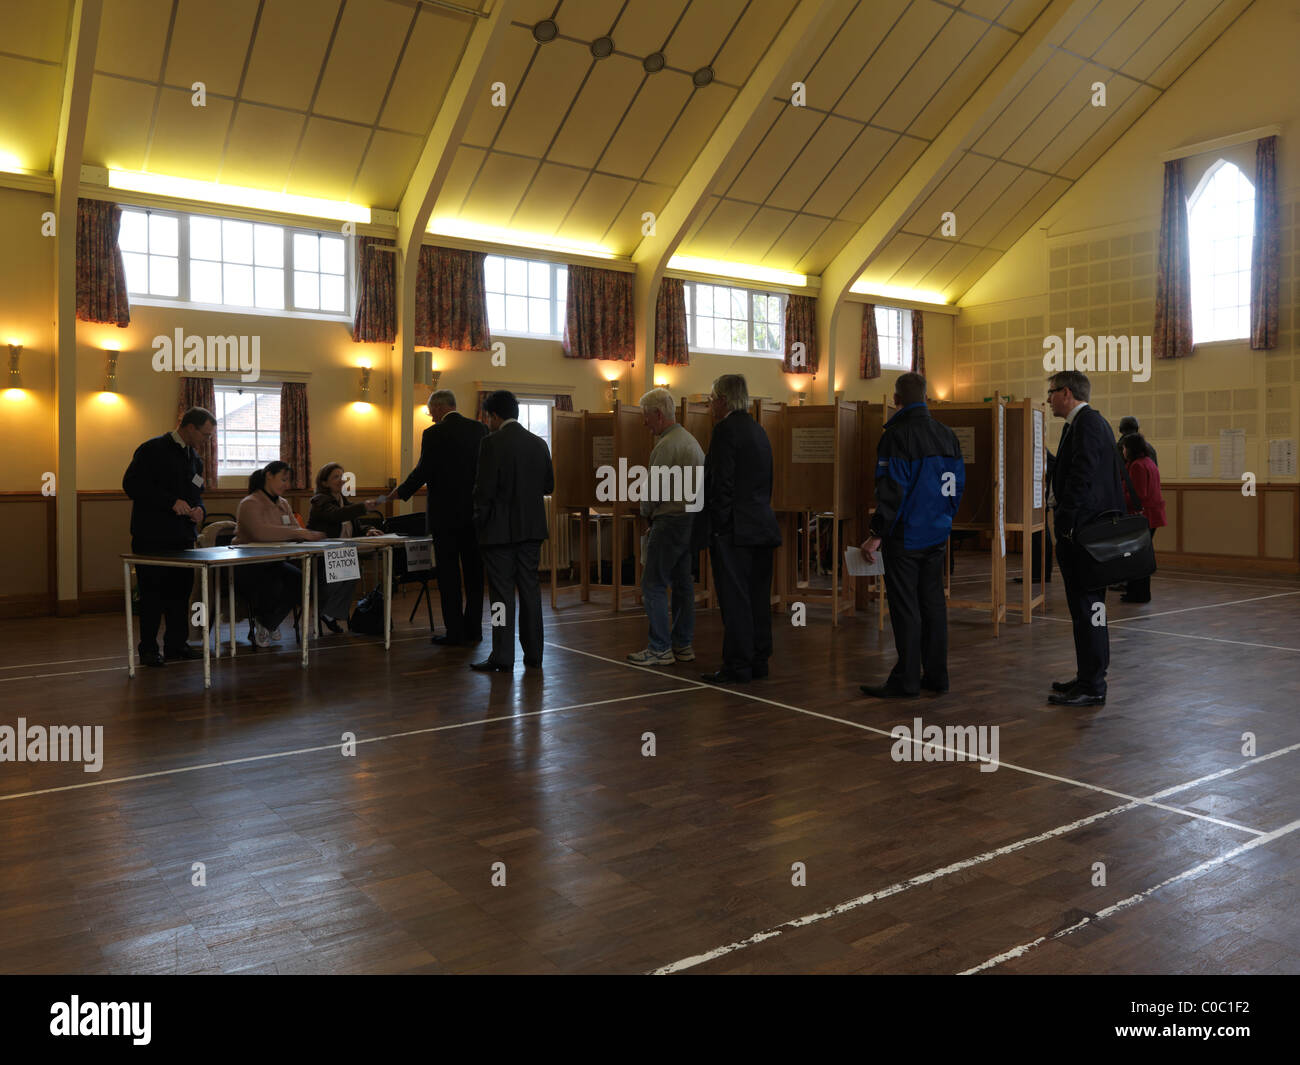 People Queuing Up To Get Voting Slips At General Election May 2010 in Church Hall England Stock Photo